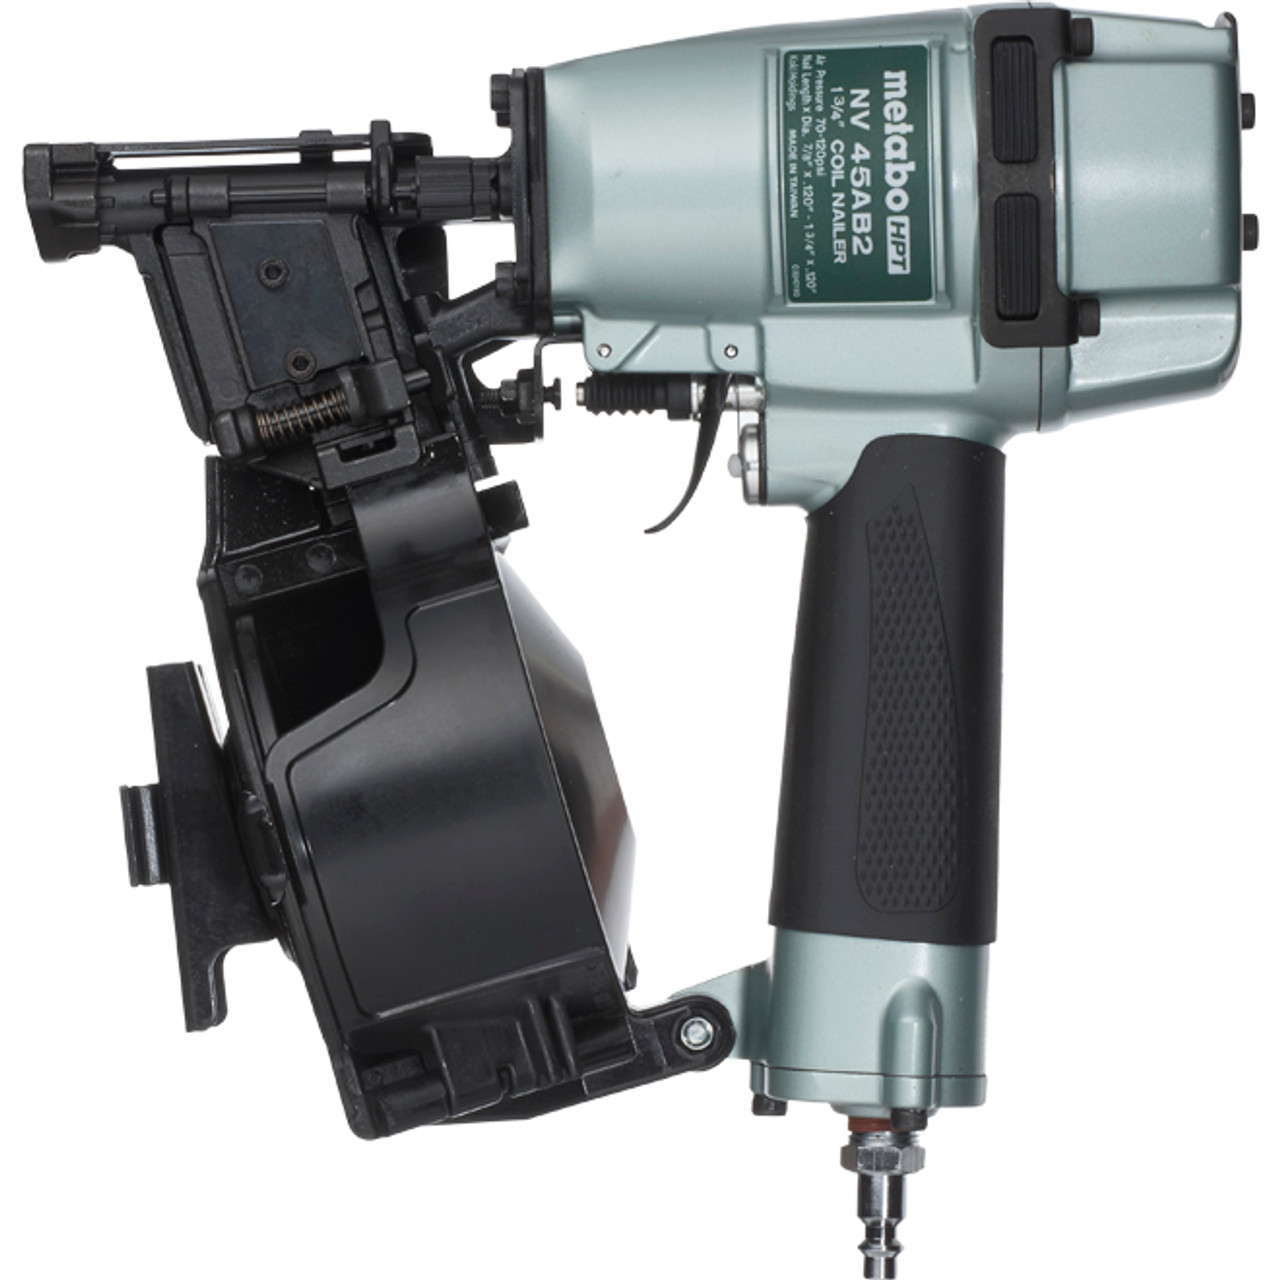 Pneumatic Coil Roofing Nailer 1-3/4" Metabo